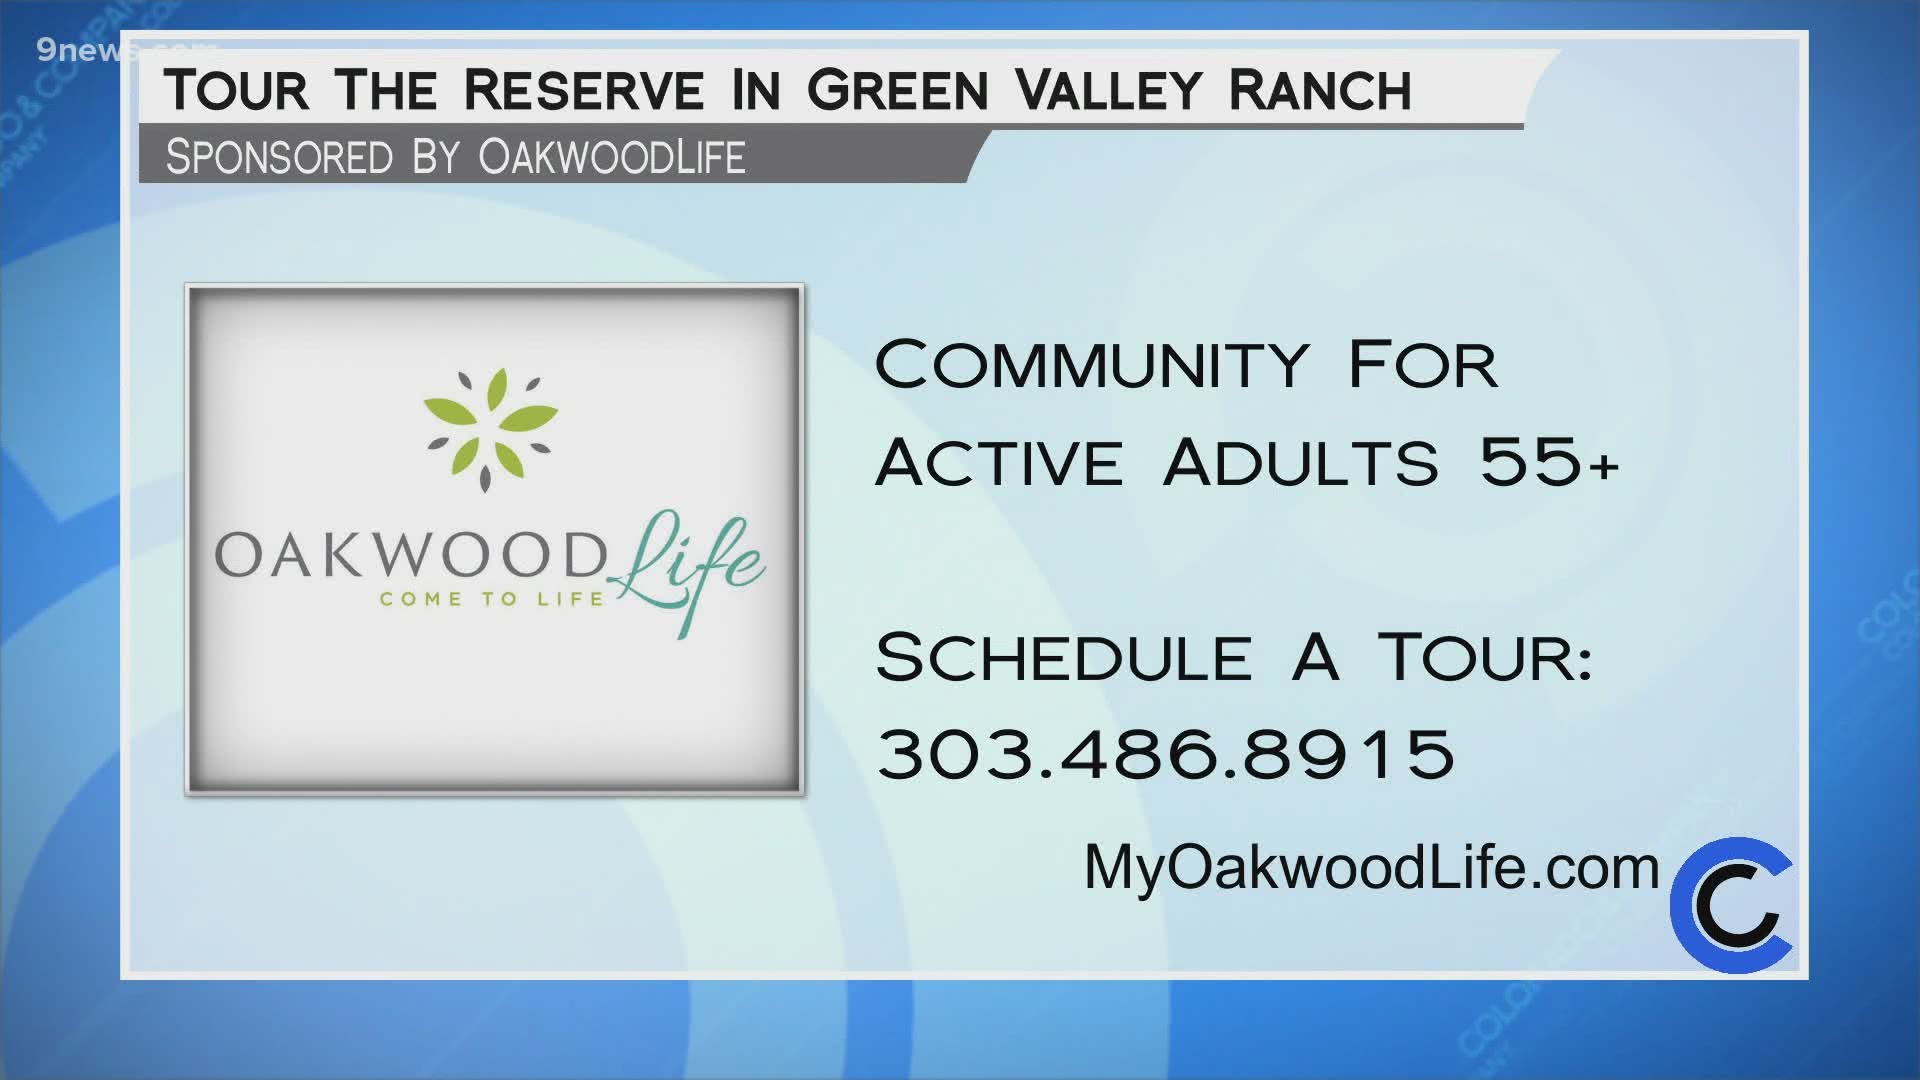 Experience the Oakwood Life and your a home in Green Valley Ranch. Call 303.486.8915 or visit MyOakwoodLife.com to get started.